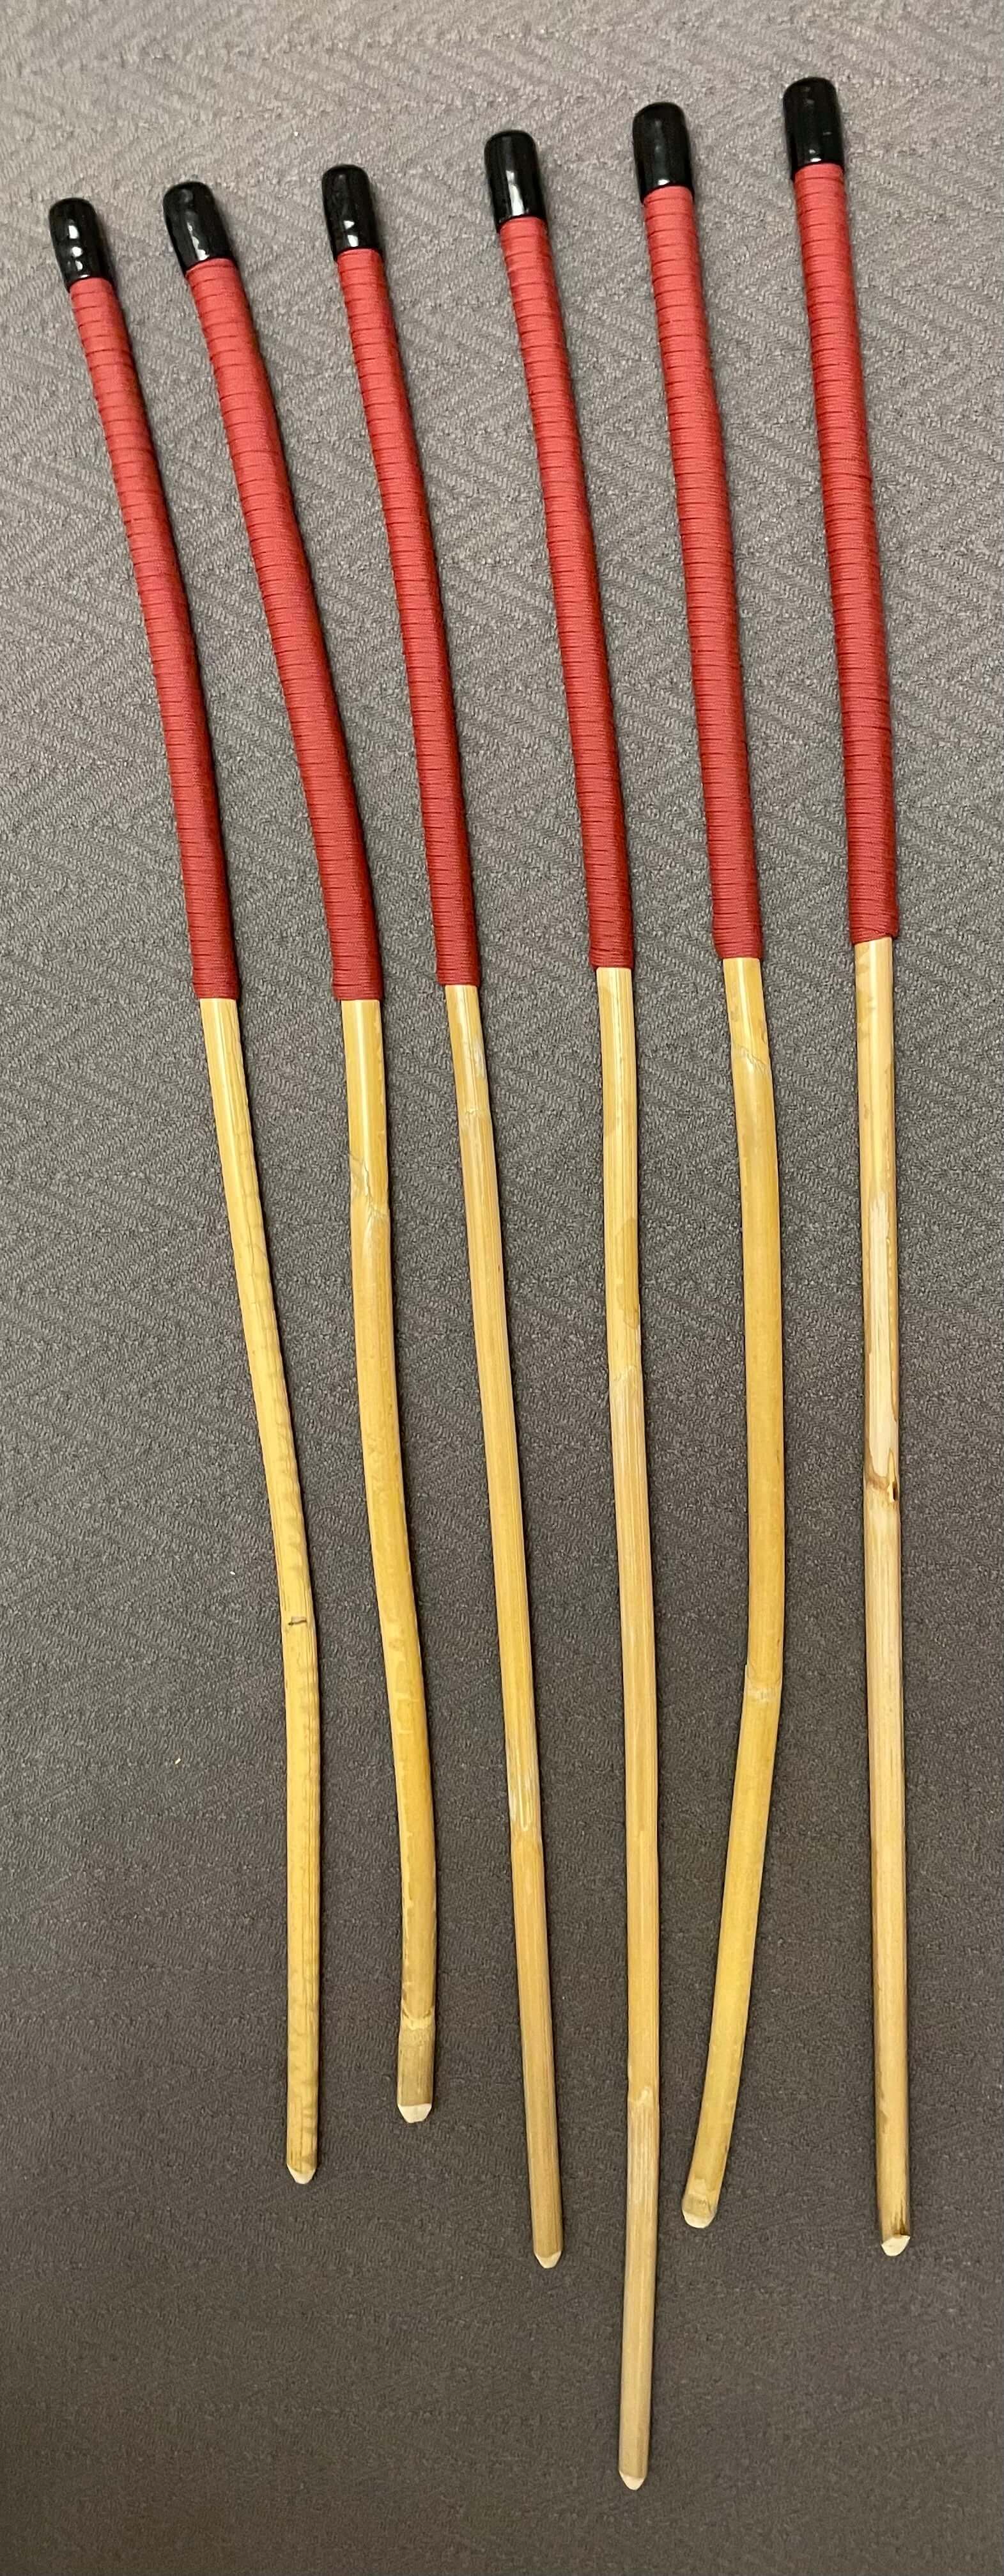 Set of 6 Classic Kooboo Rattan Punishment canes with RED Paracord Handles - Beginner / Novice Cane Set